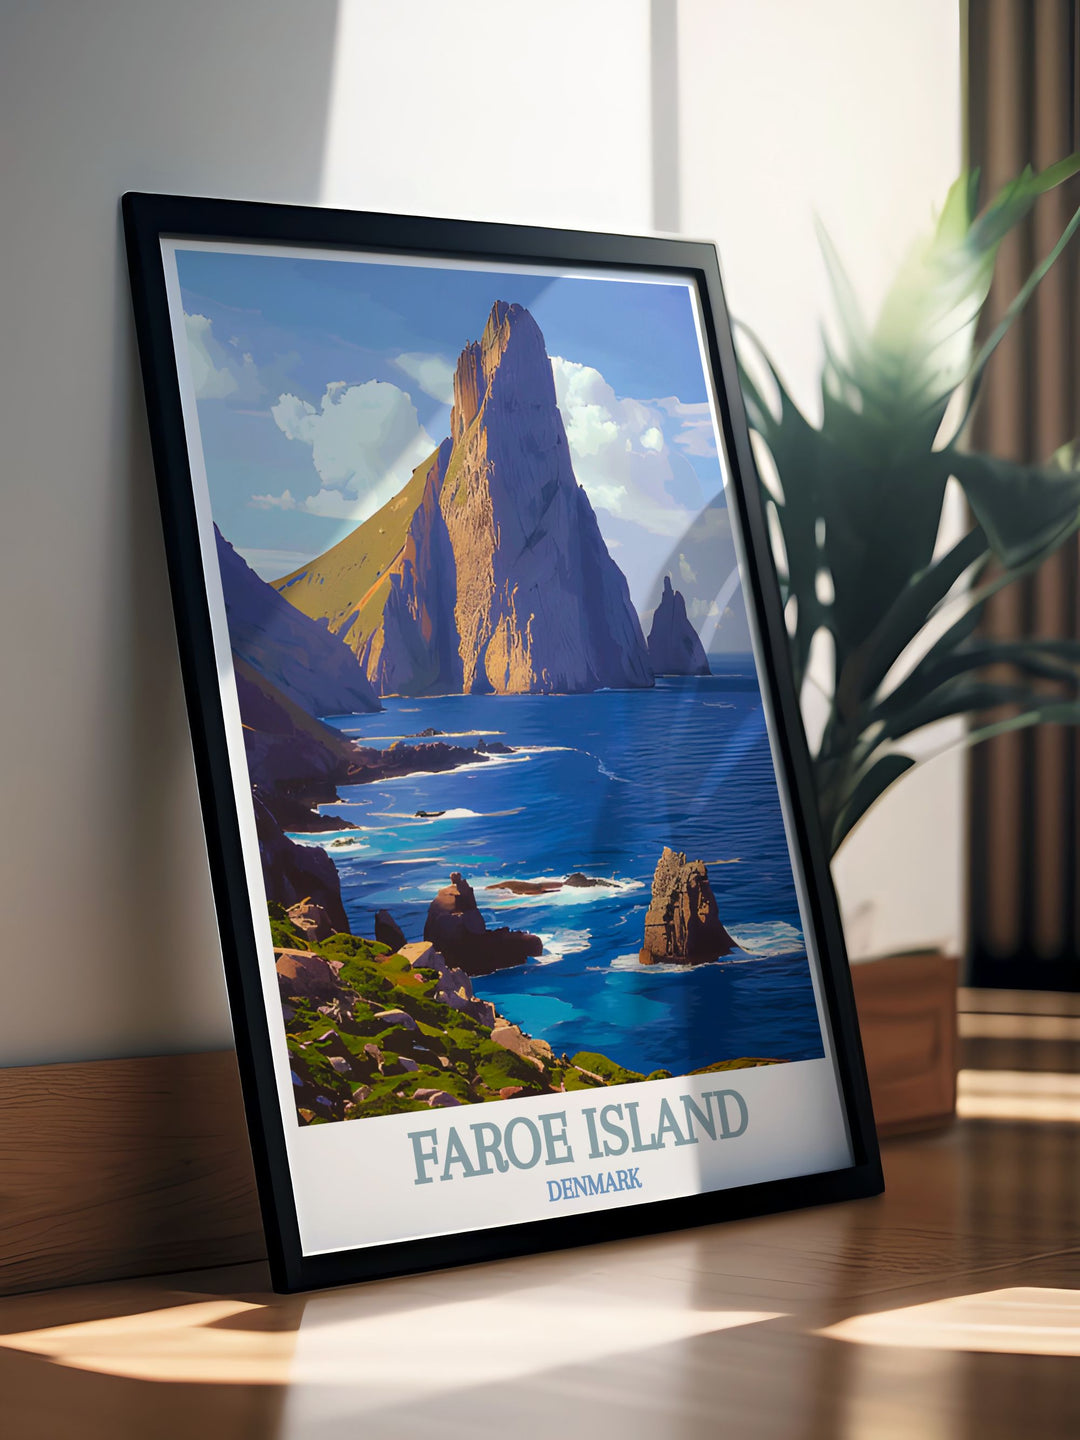 This Faroe Islands travel poster features the stunning Tindhólmur and its picturesque surroundings, making it an ideal piece for those who love exploring Denmarks natural landscapes.